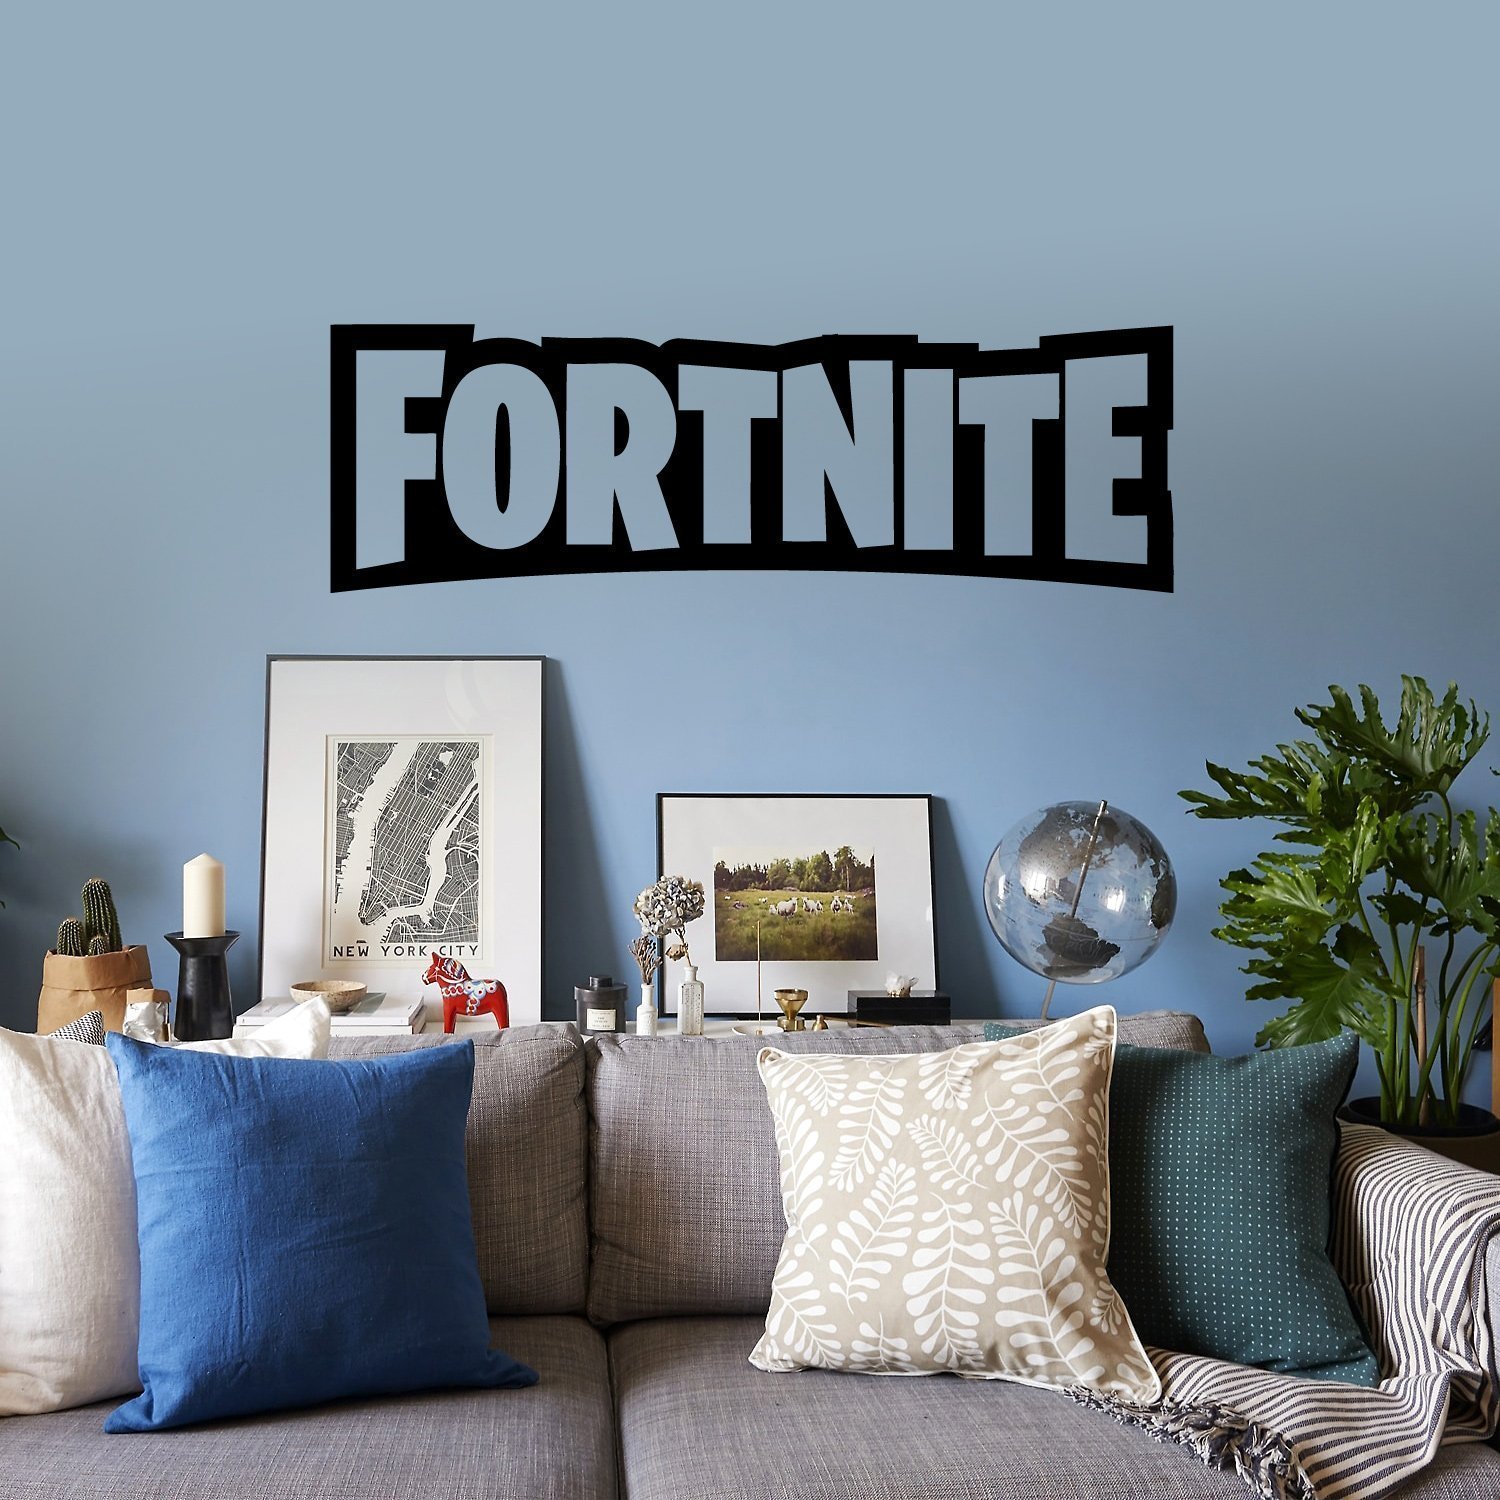 A contemporary style of Fortnite